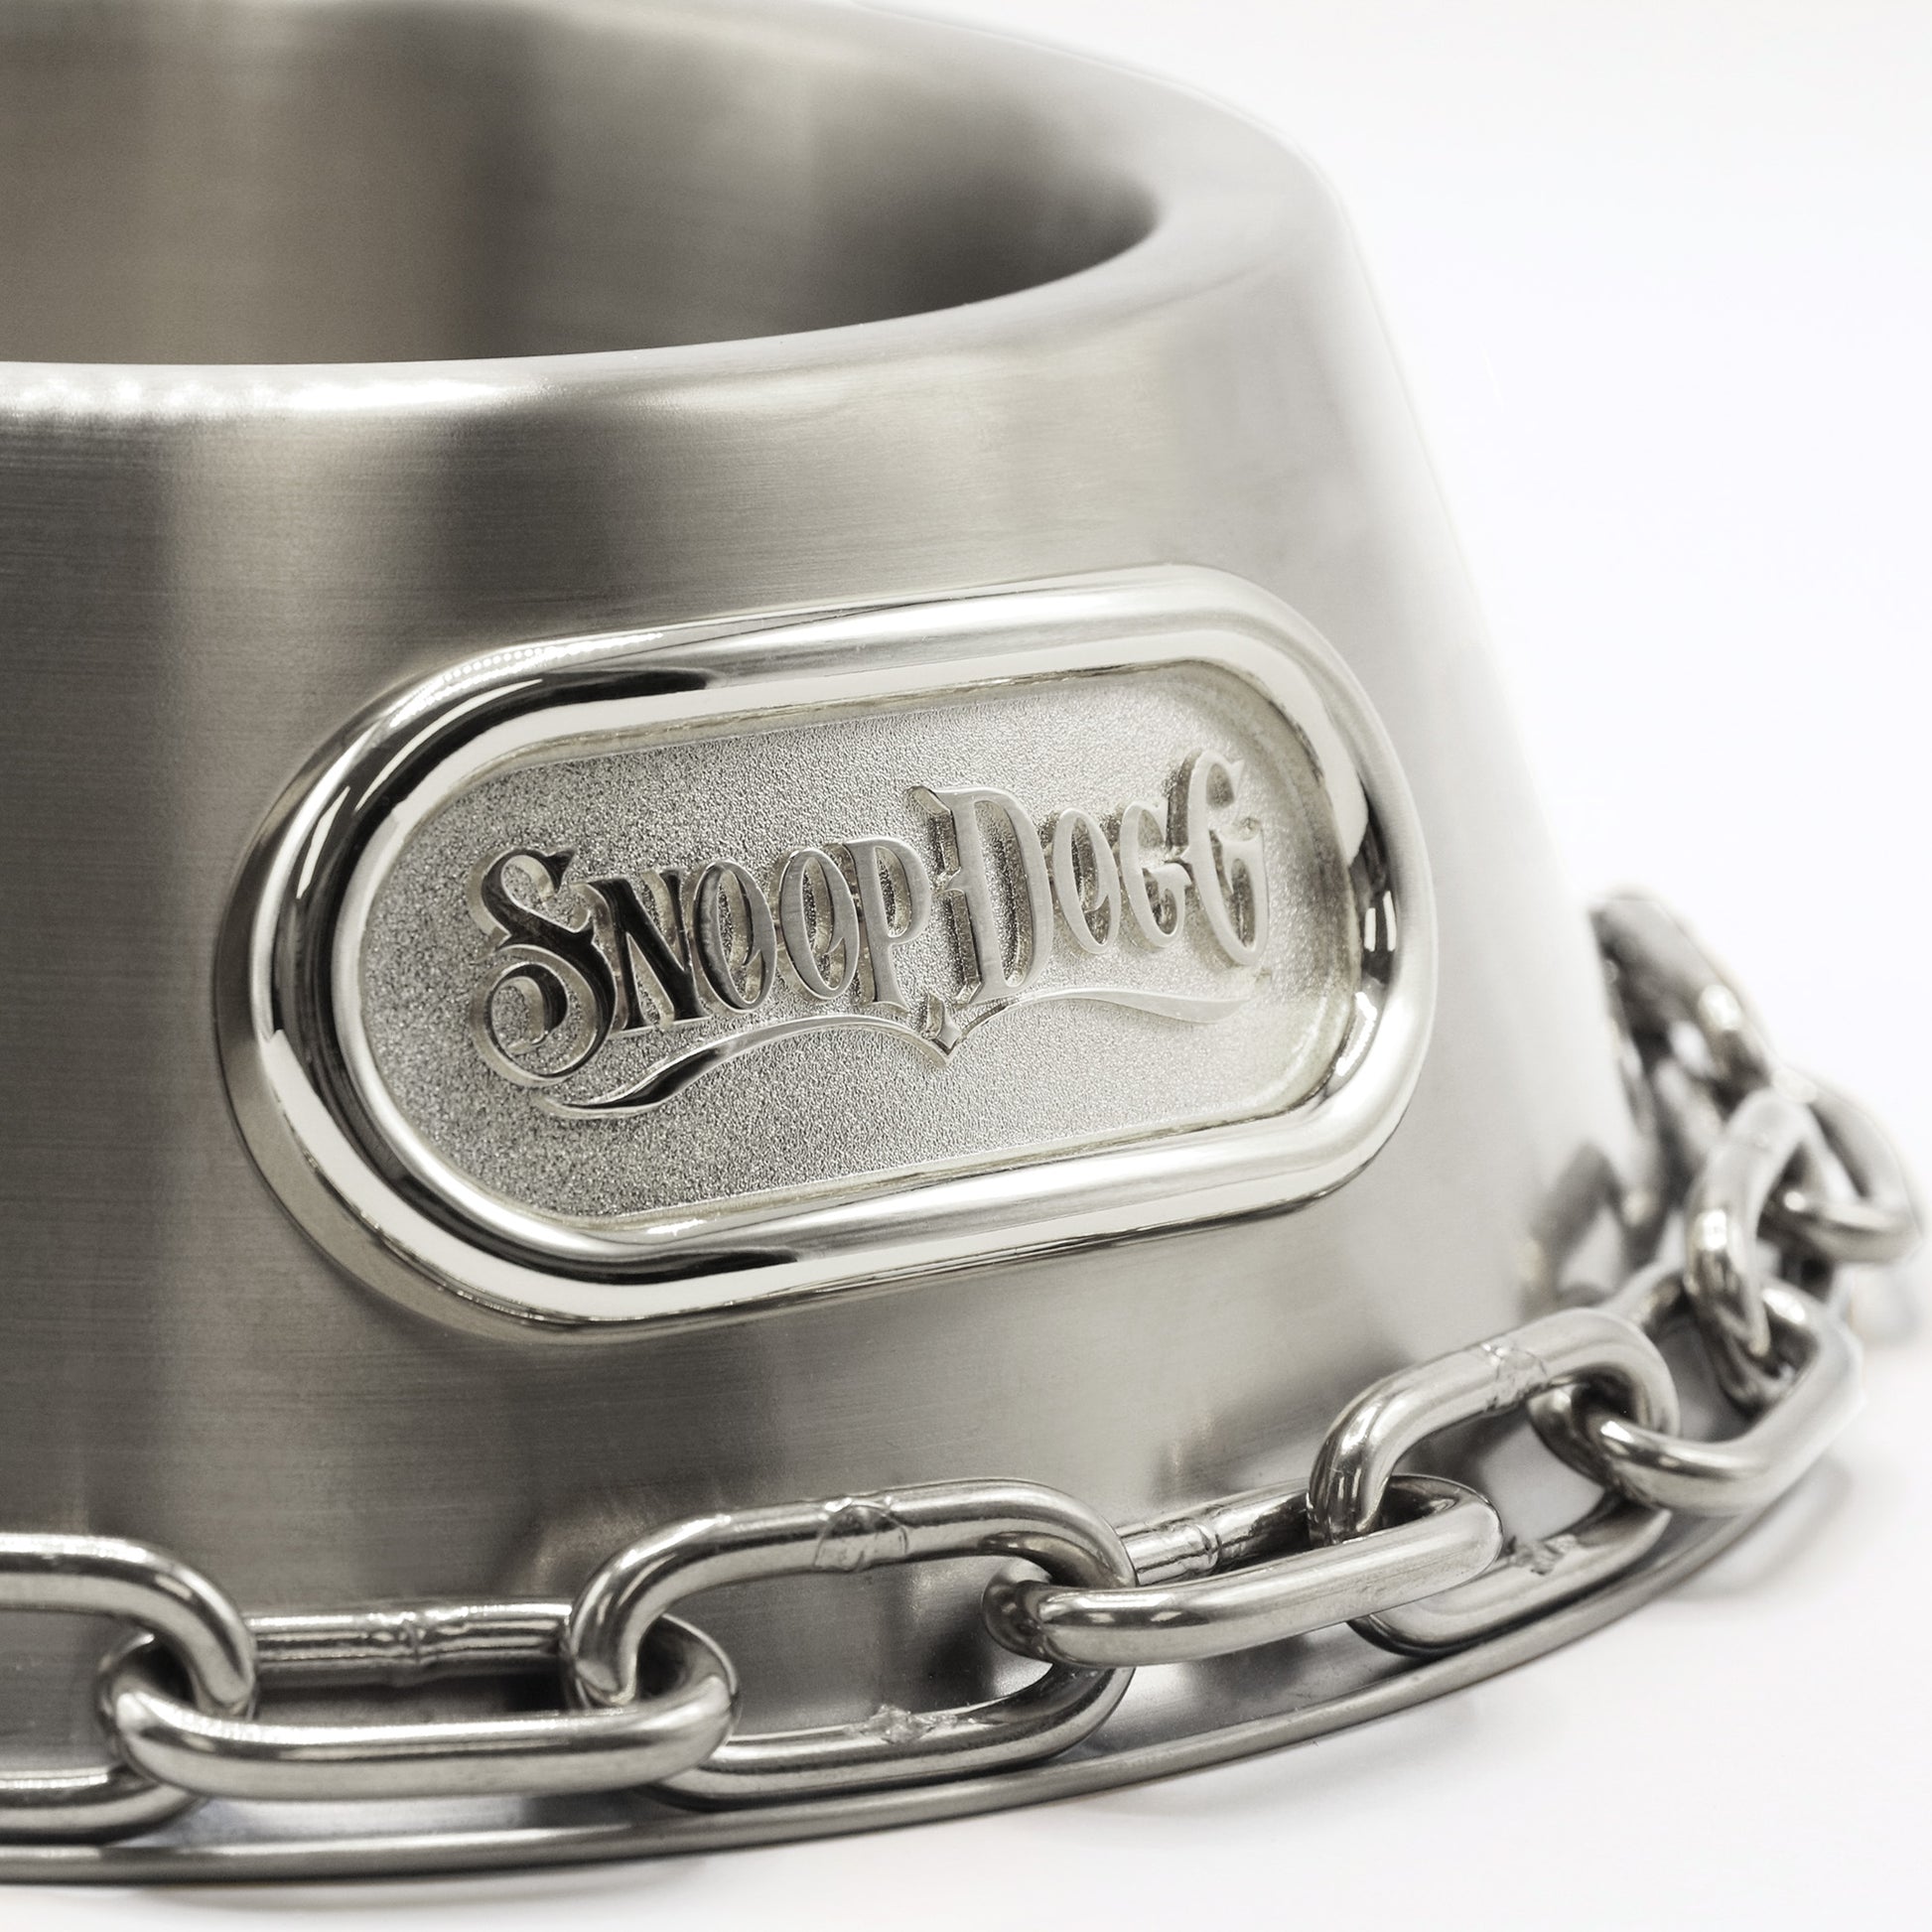 A close up detail image of the Deluxe Silver Pet Bowl.